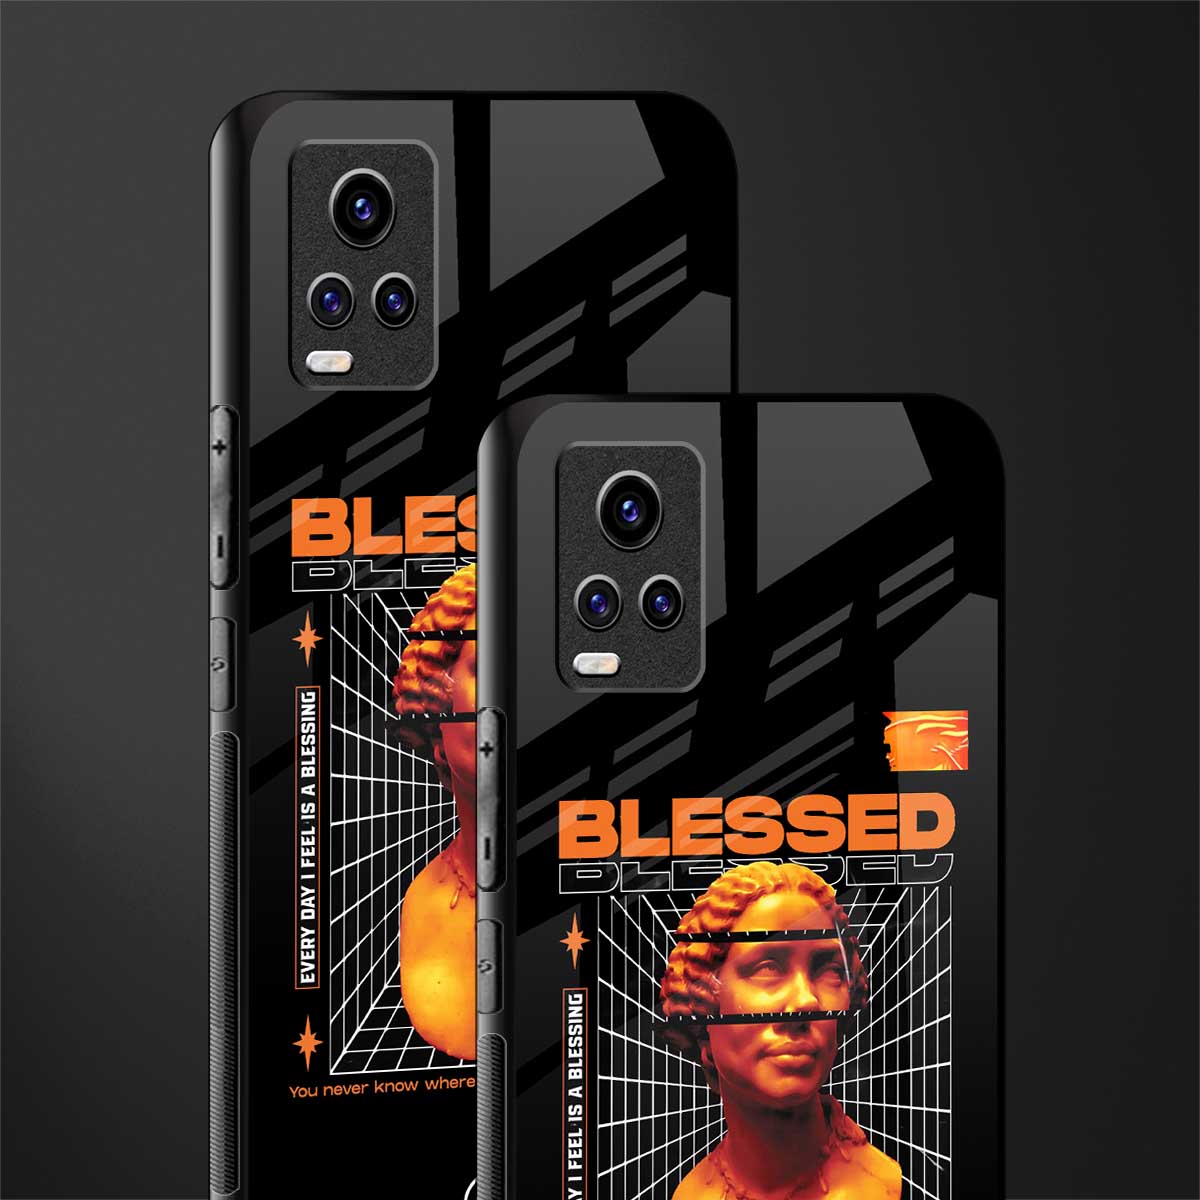 blessing back phone cover | glass case for vivo y73